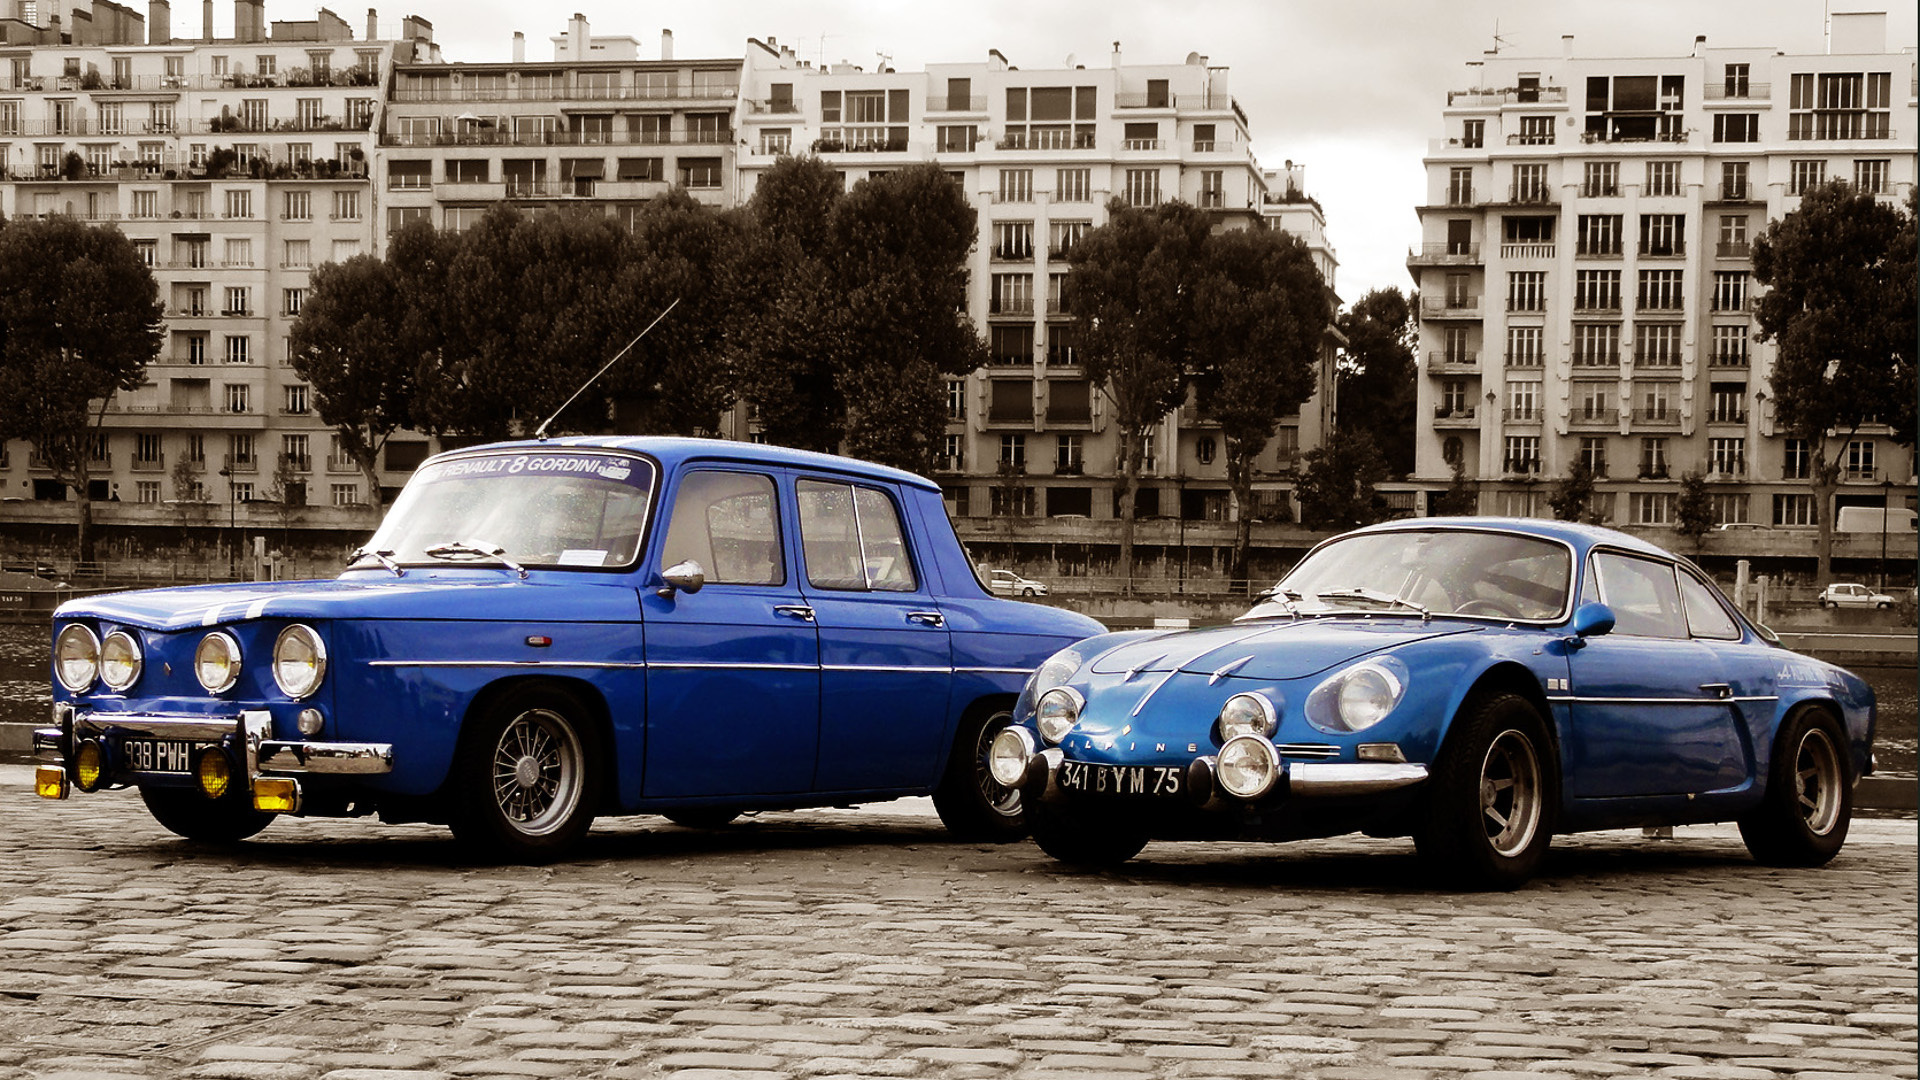 Historic cars exempt from Paris old car traffic ban